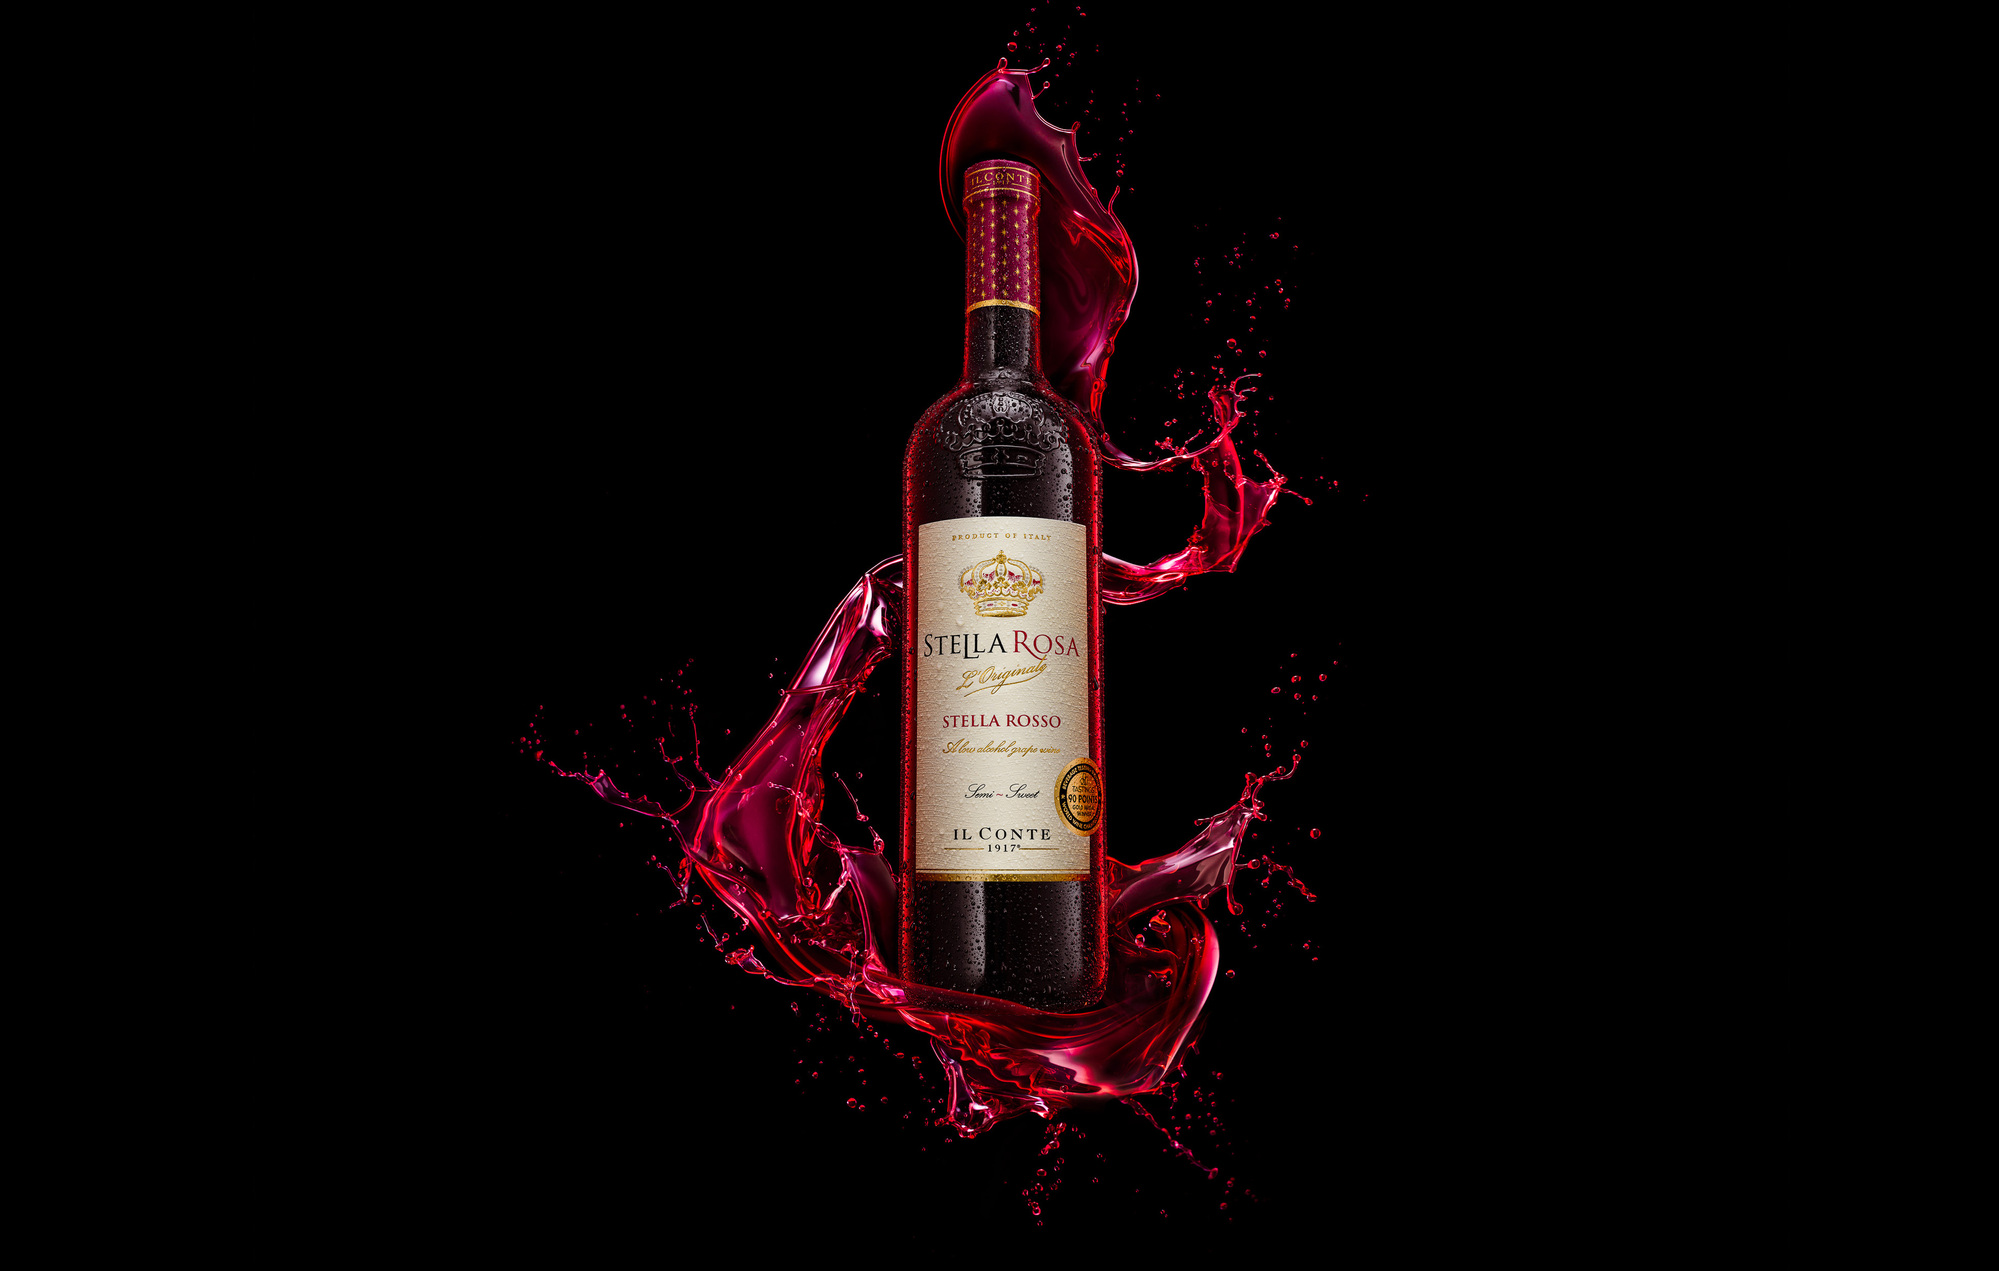 Stella Rosa wine bottle splash photography by beverage and drinks photographer Timothy Hogan in Los Angeles